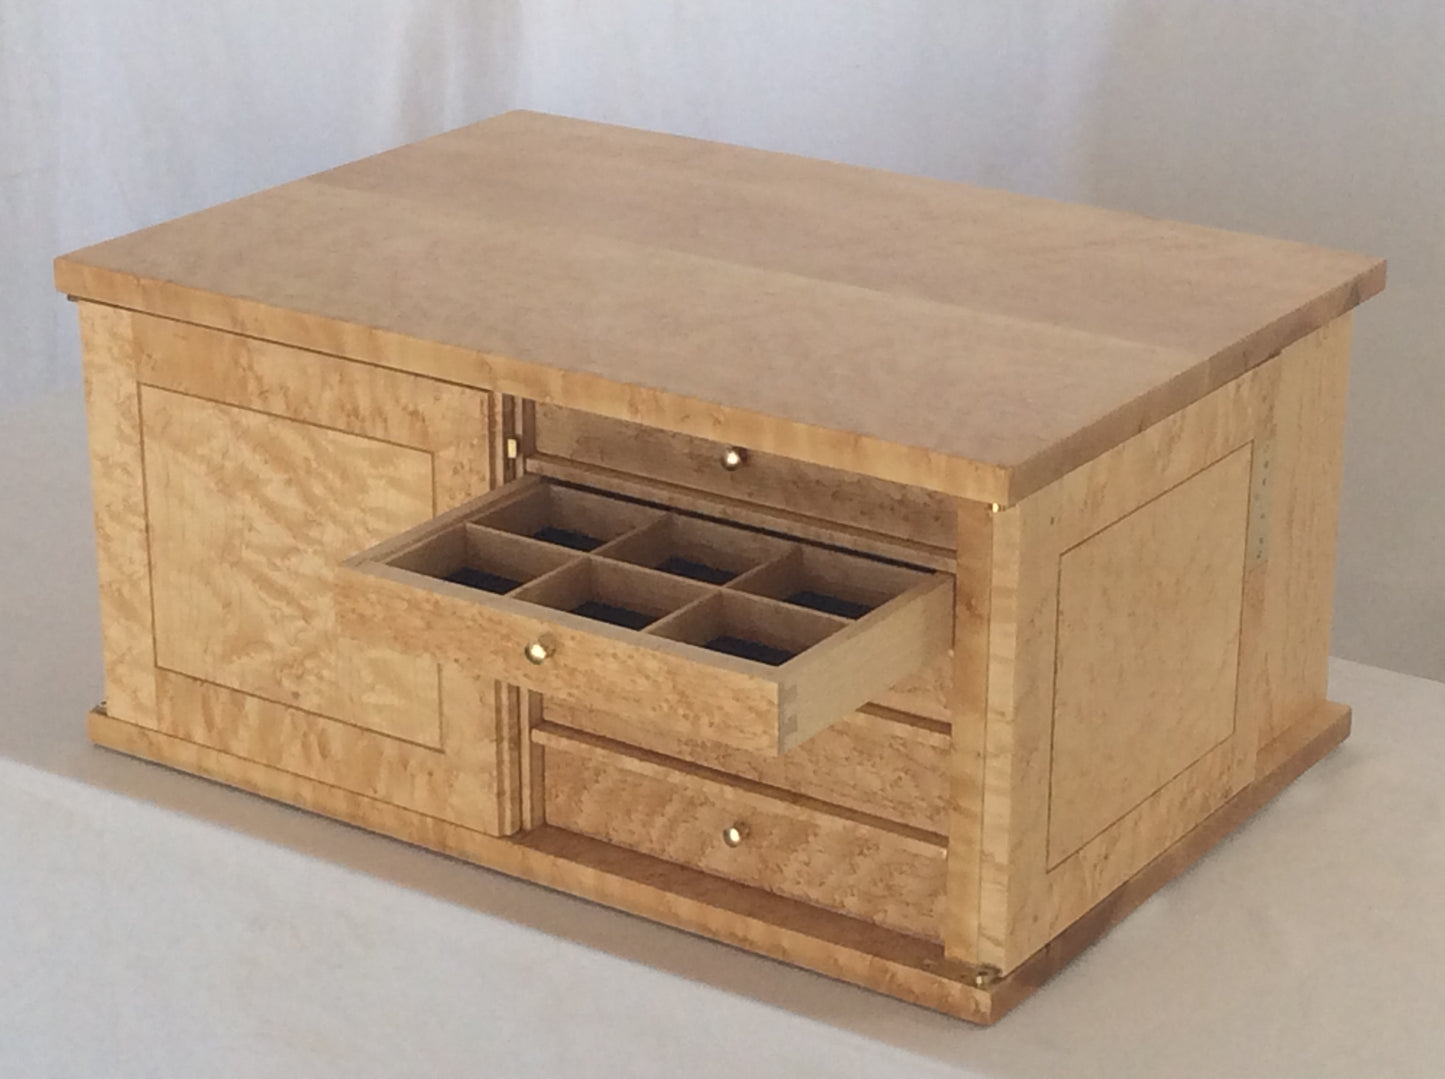 Photo showing the machine cut dovetails on the side of the drawer front and drawer side. It also shows how the drawer can be organized with dividers. The drawer has a black velvet liner.